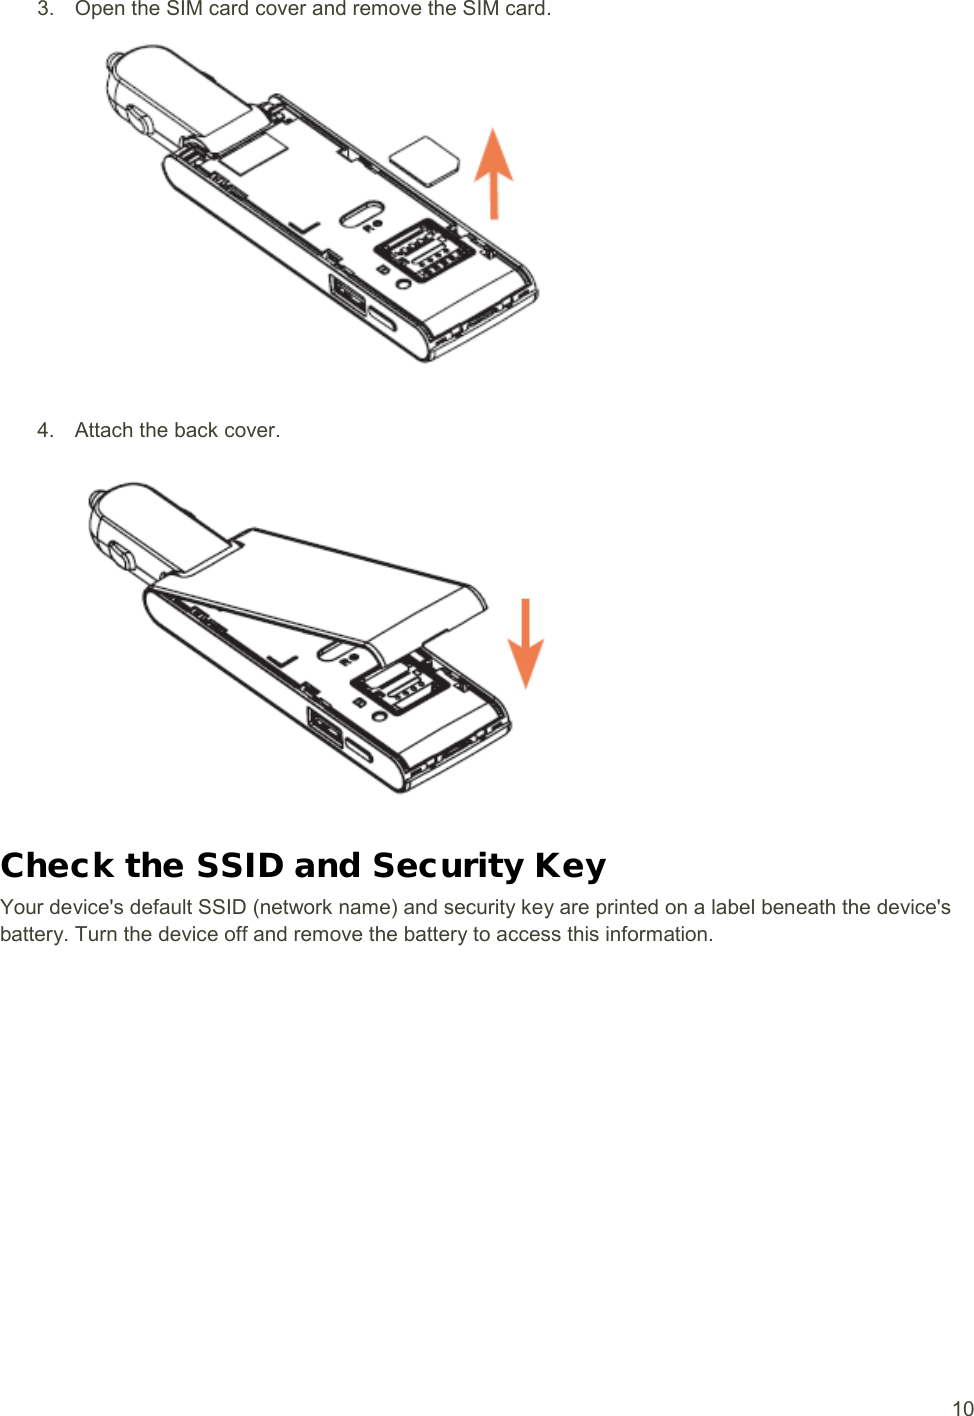  10 3. Open the SIM card cover and remove the SIM card.  4. Attach the back cover.  Check the SSID and Security Key Your device&apos;s default SSID (network name) and security key are printed on a label beneath the device&apos;s battery. Turn the device off and remove the battery to access this information. 